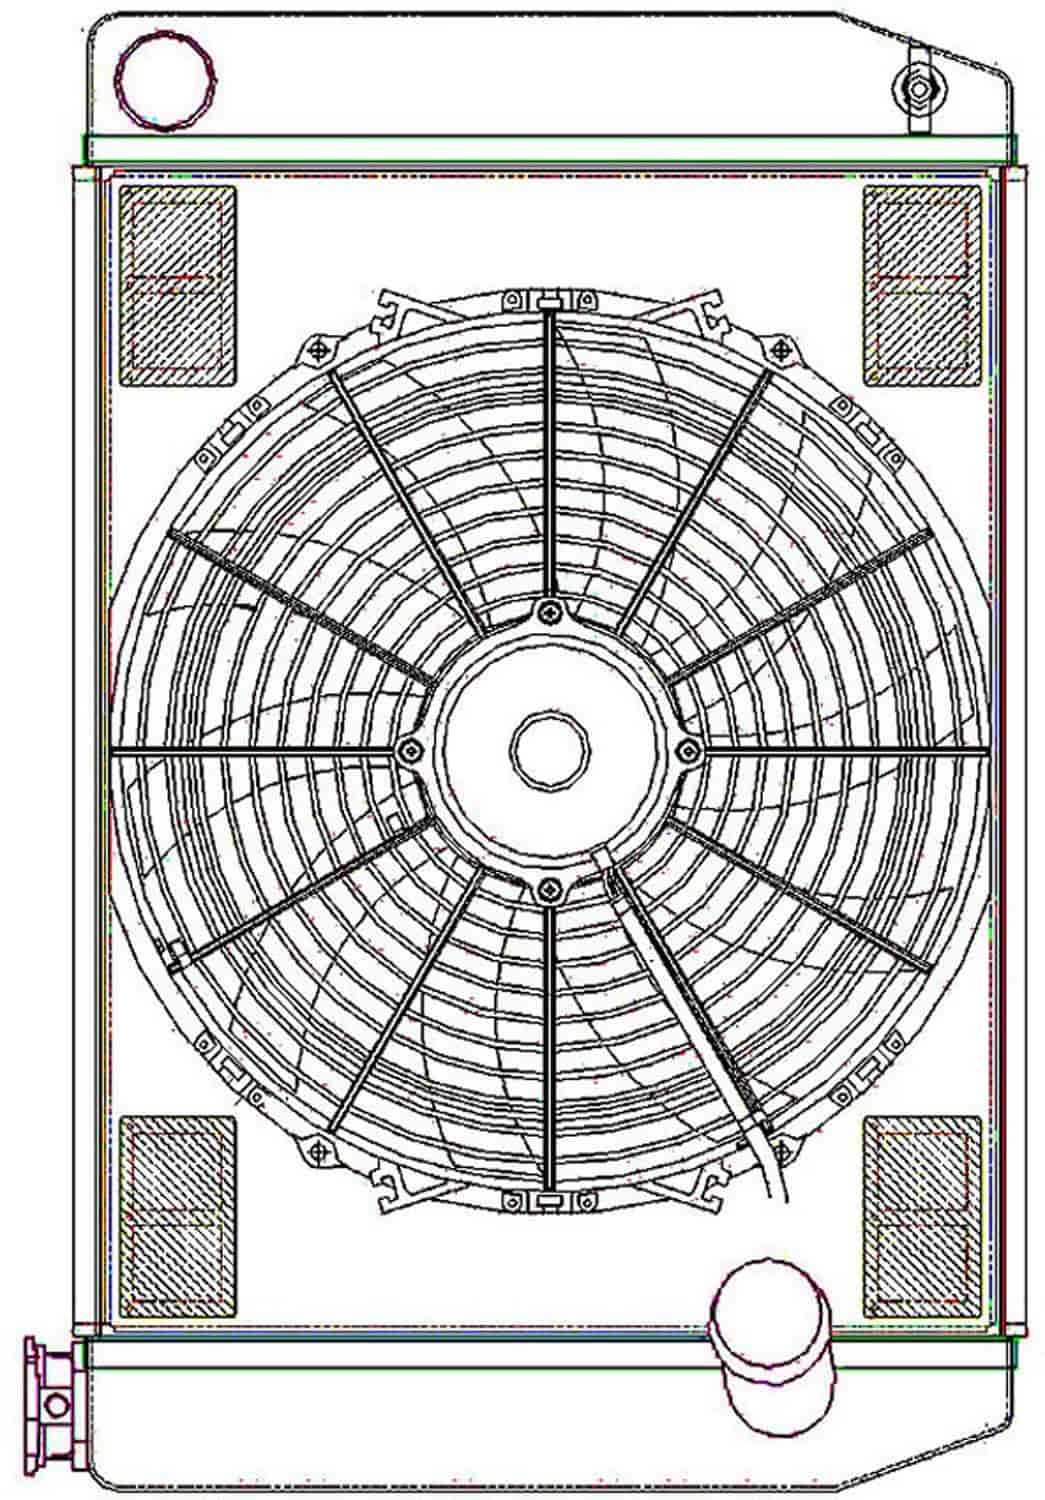 ClassicCool ComboUnit Universal Fit Radiator and Fan Single Pass Crossflow Design 24" x 15.50" with No Options